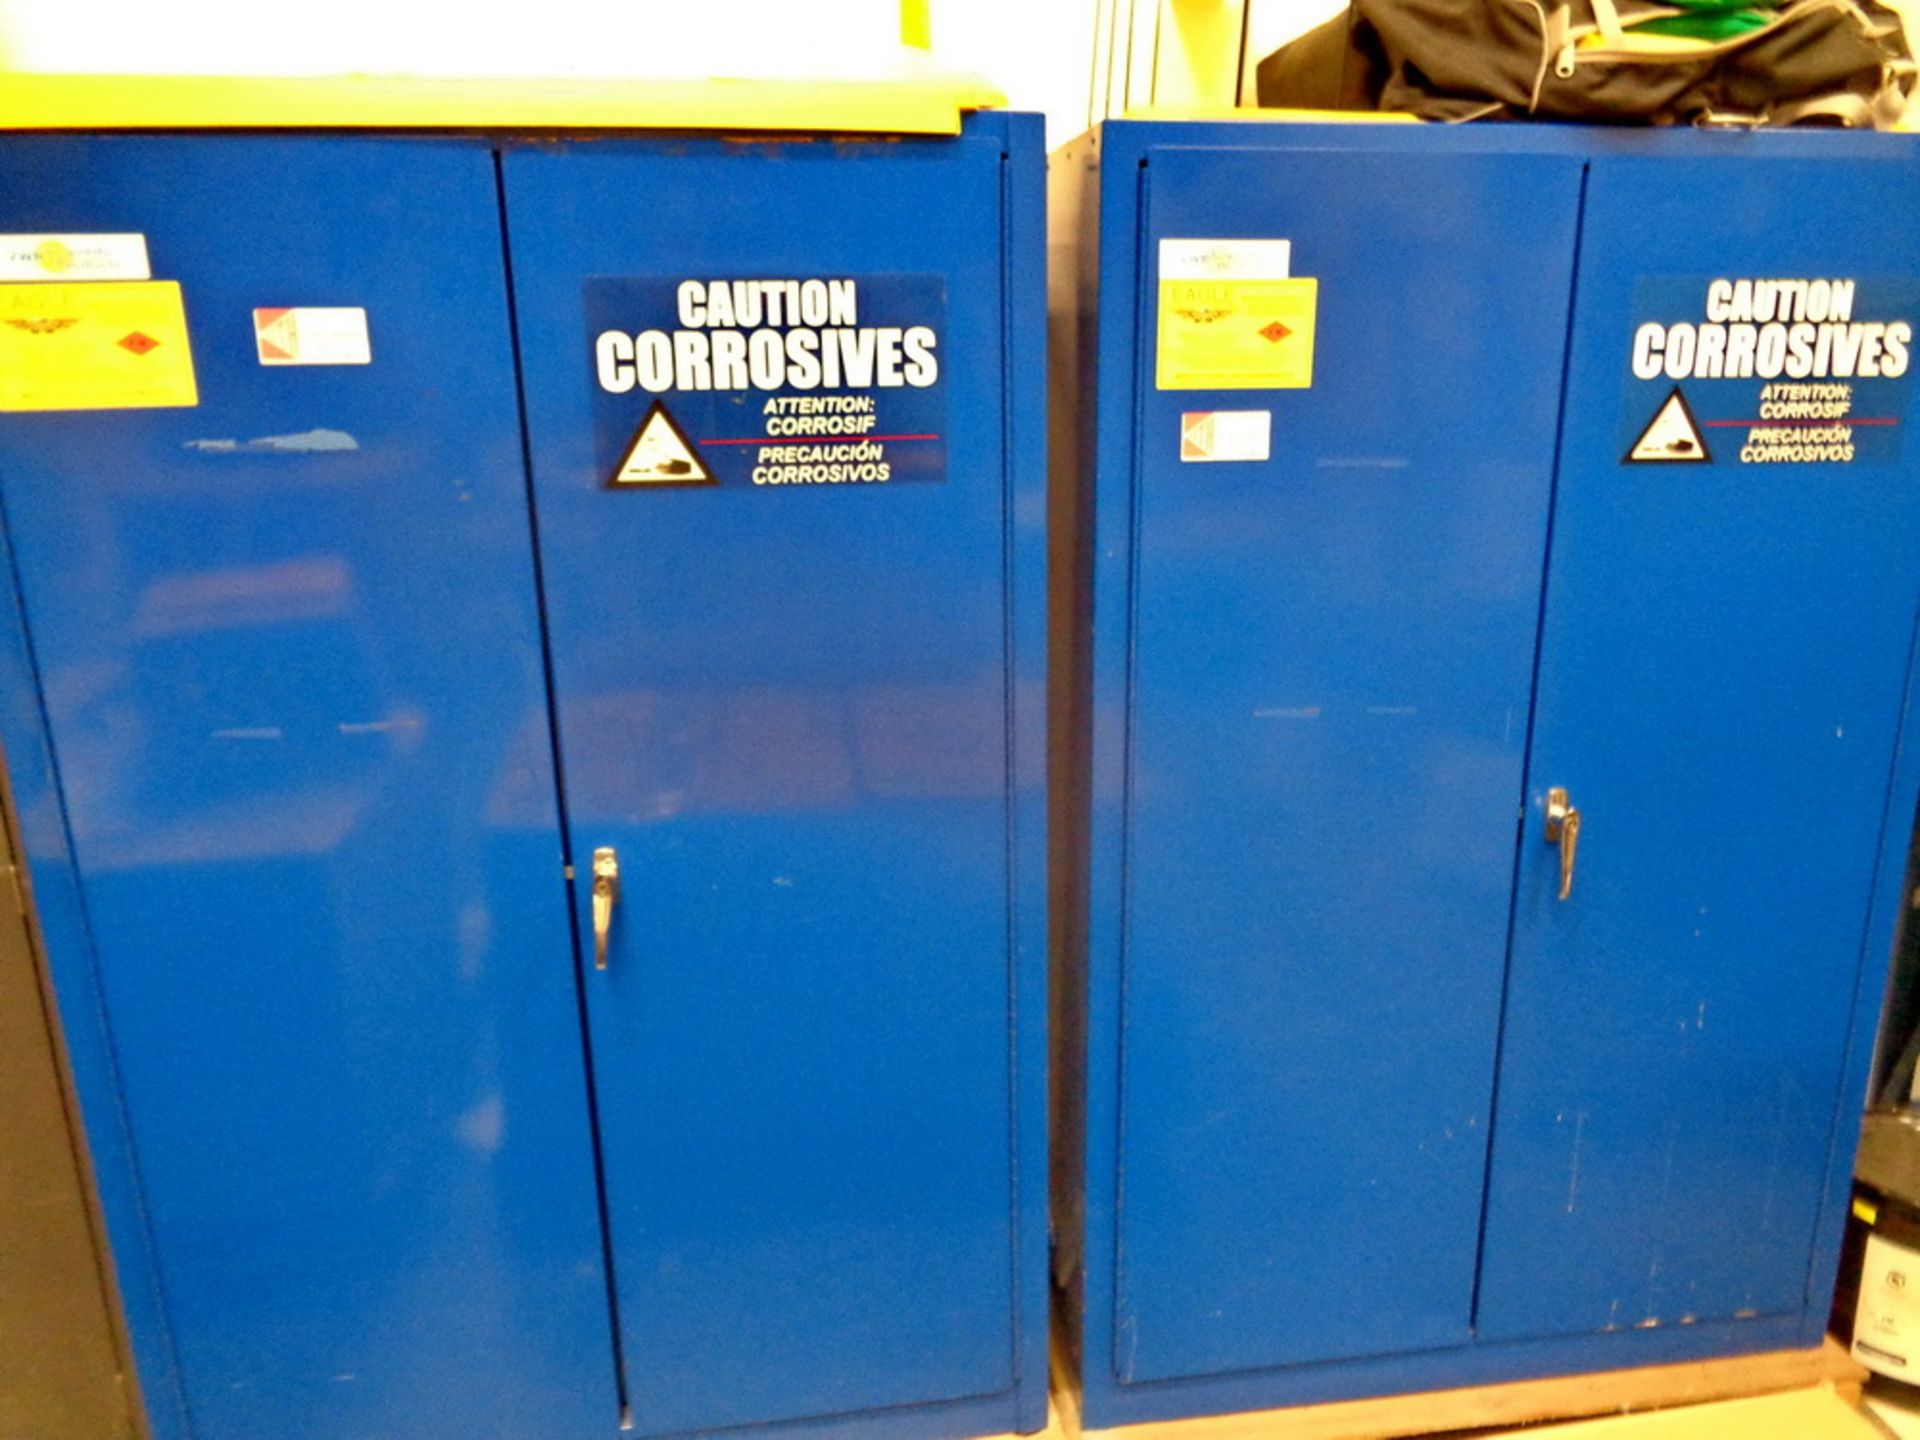 (2) Eagle 45 gallon Two Door Corrosives Storage Cabinet, Model CRA-47 (Note: 2nd loading dock)